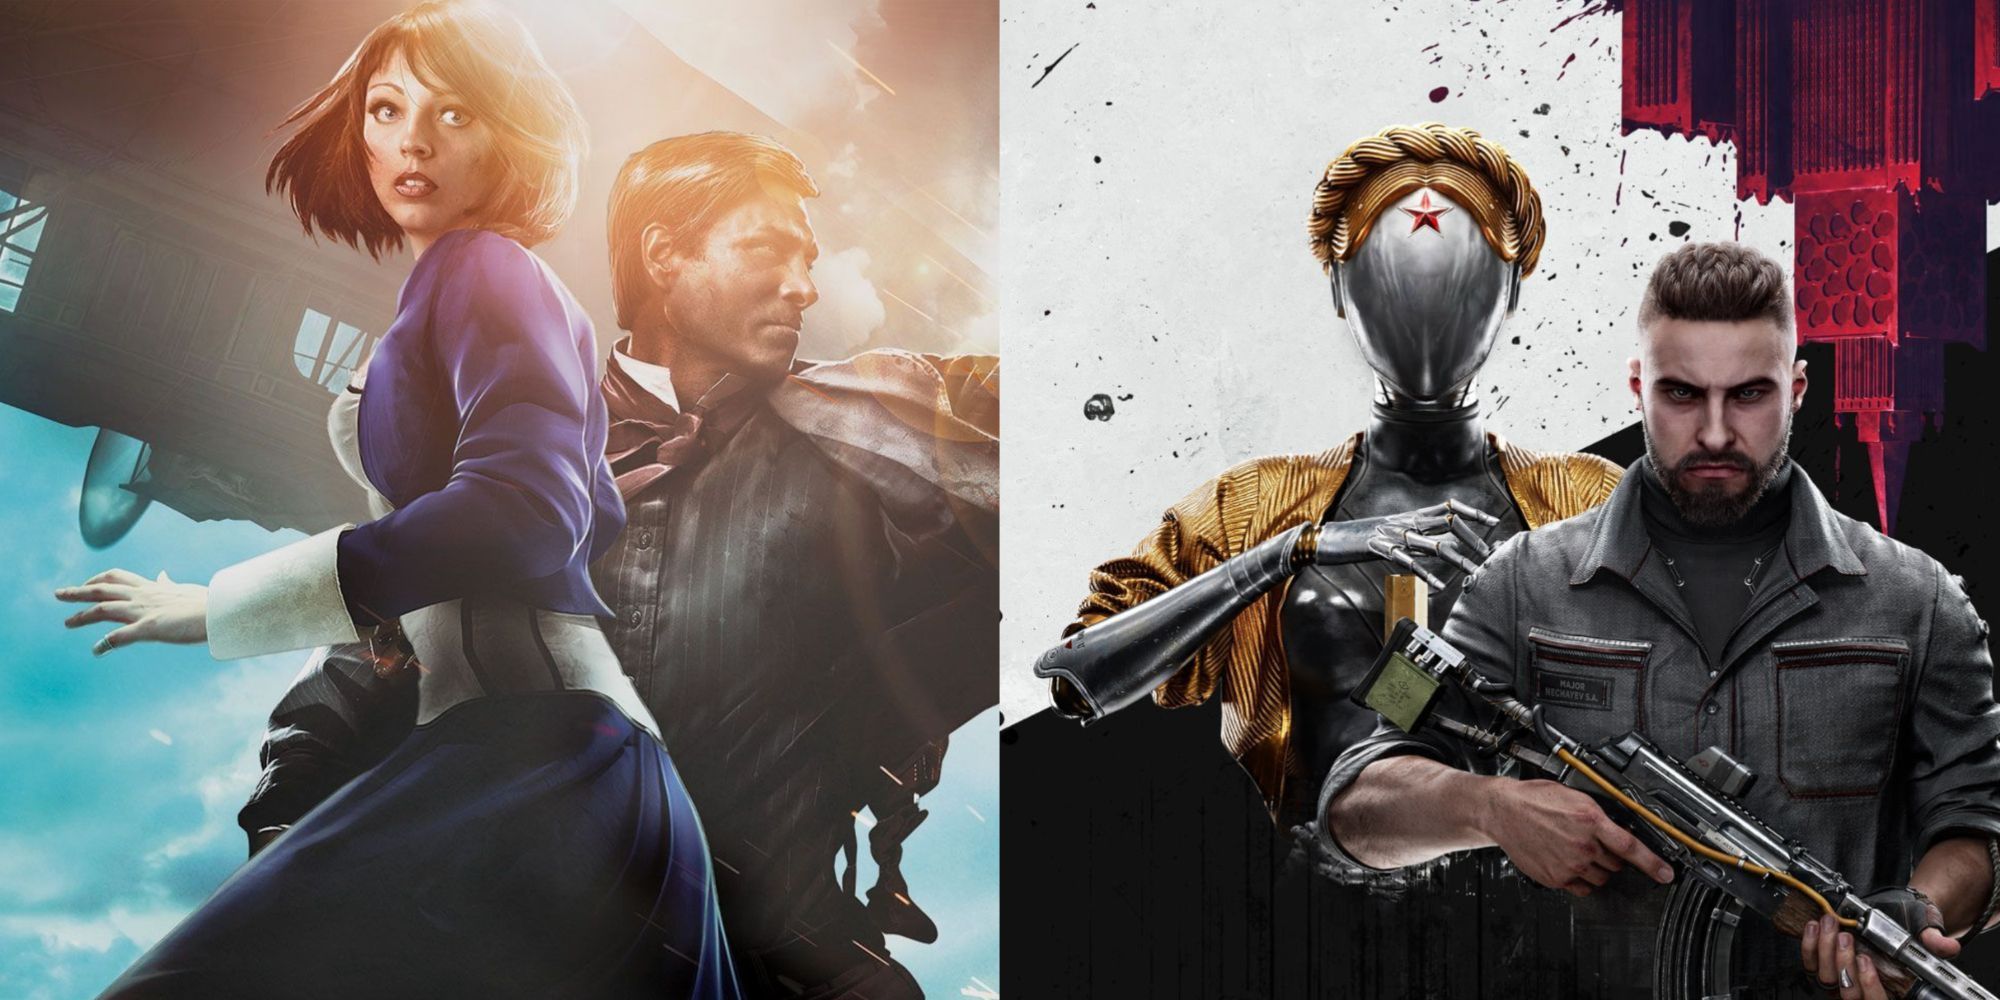 A split image of the promo art for BioShock Infinite with Booker holding Elizabeth close as he aims his weapon, and the cover art for Atomic Heart with P-3 and the Twin holding his shoulder.